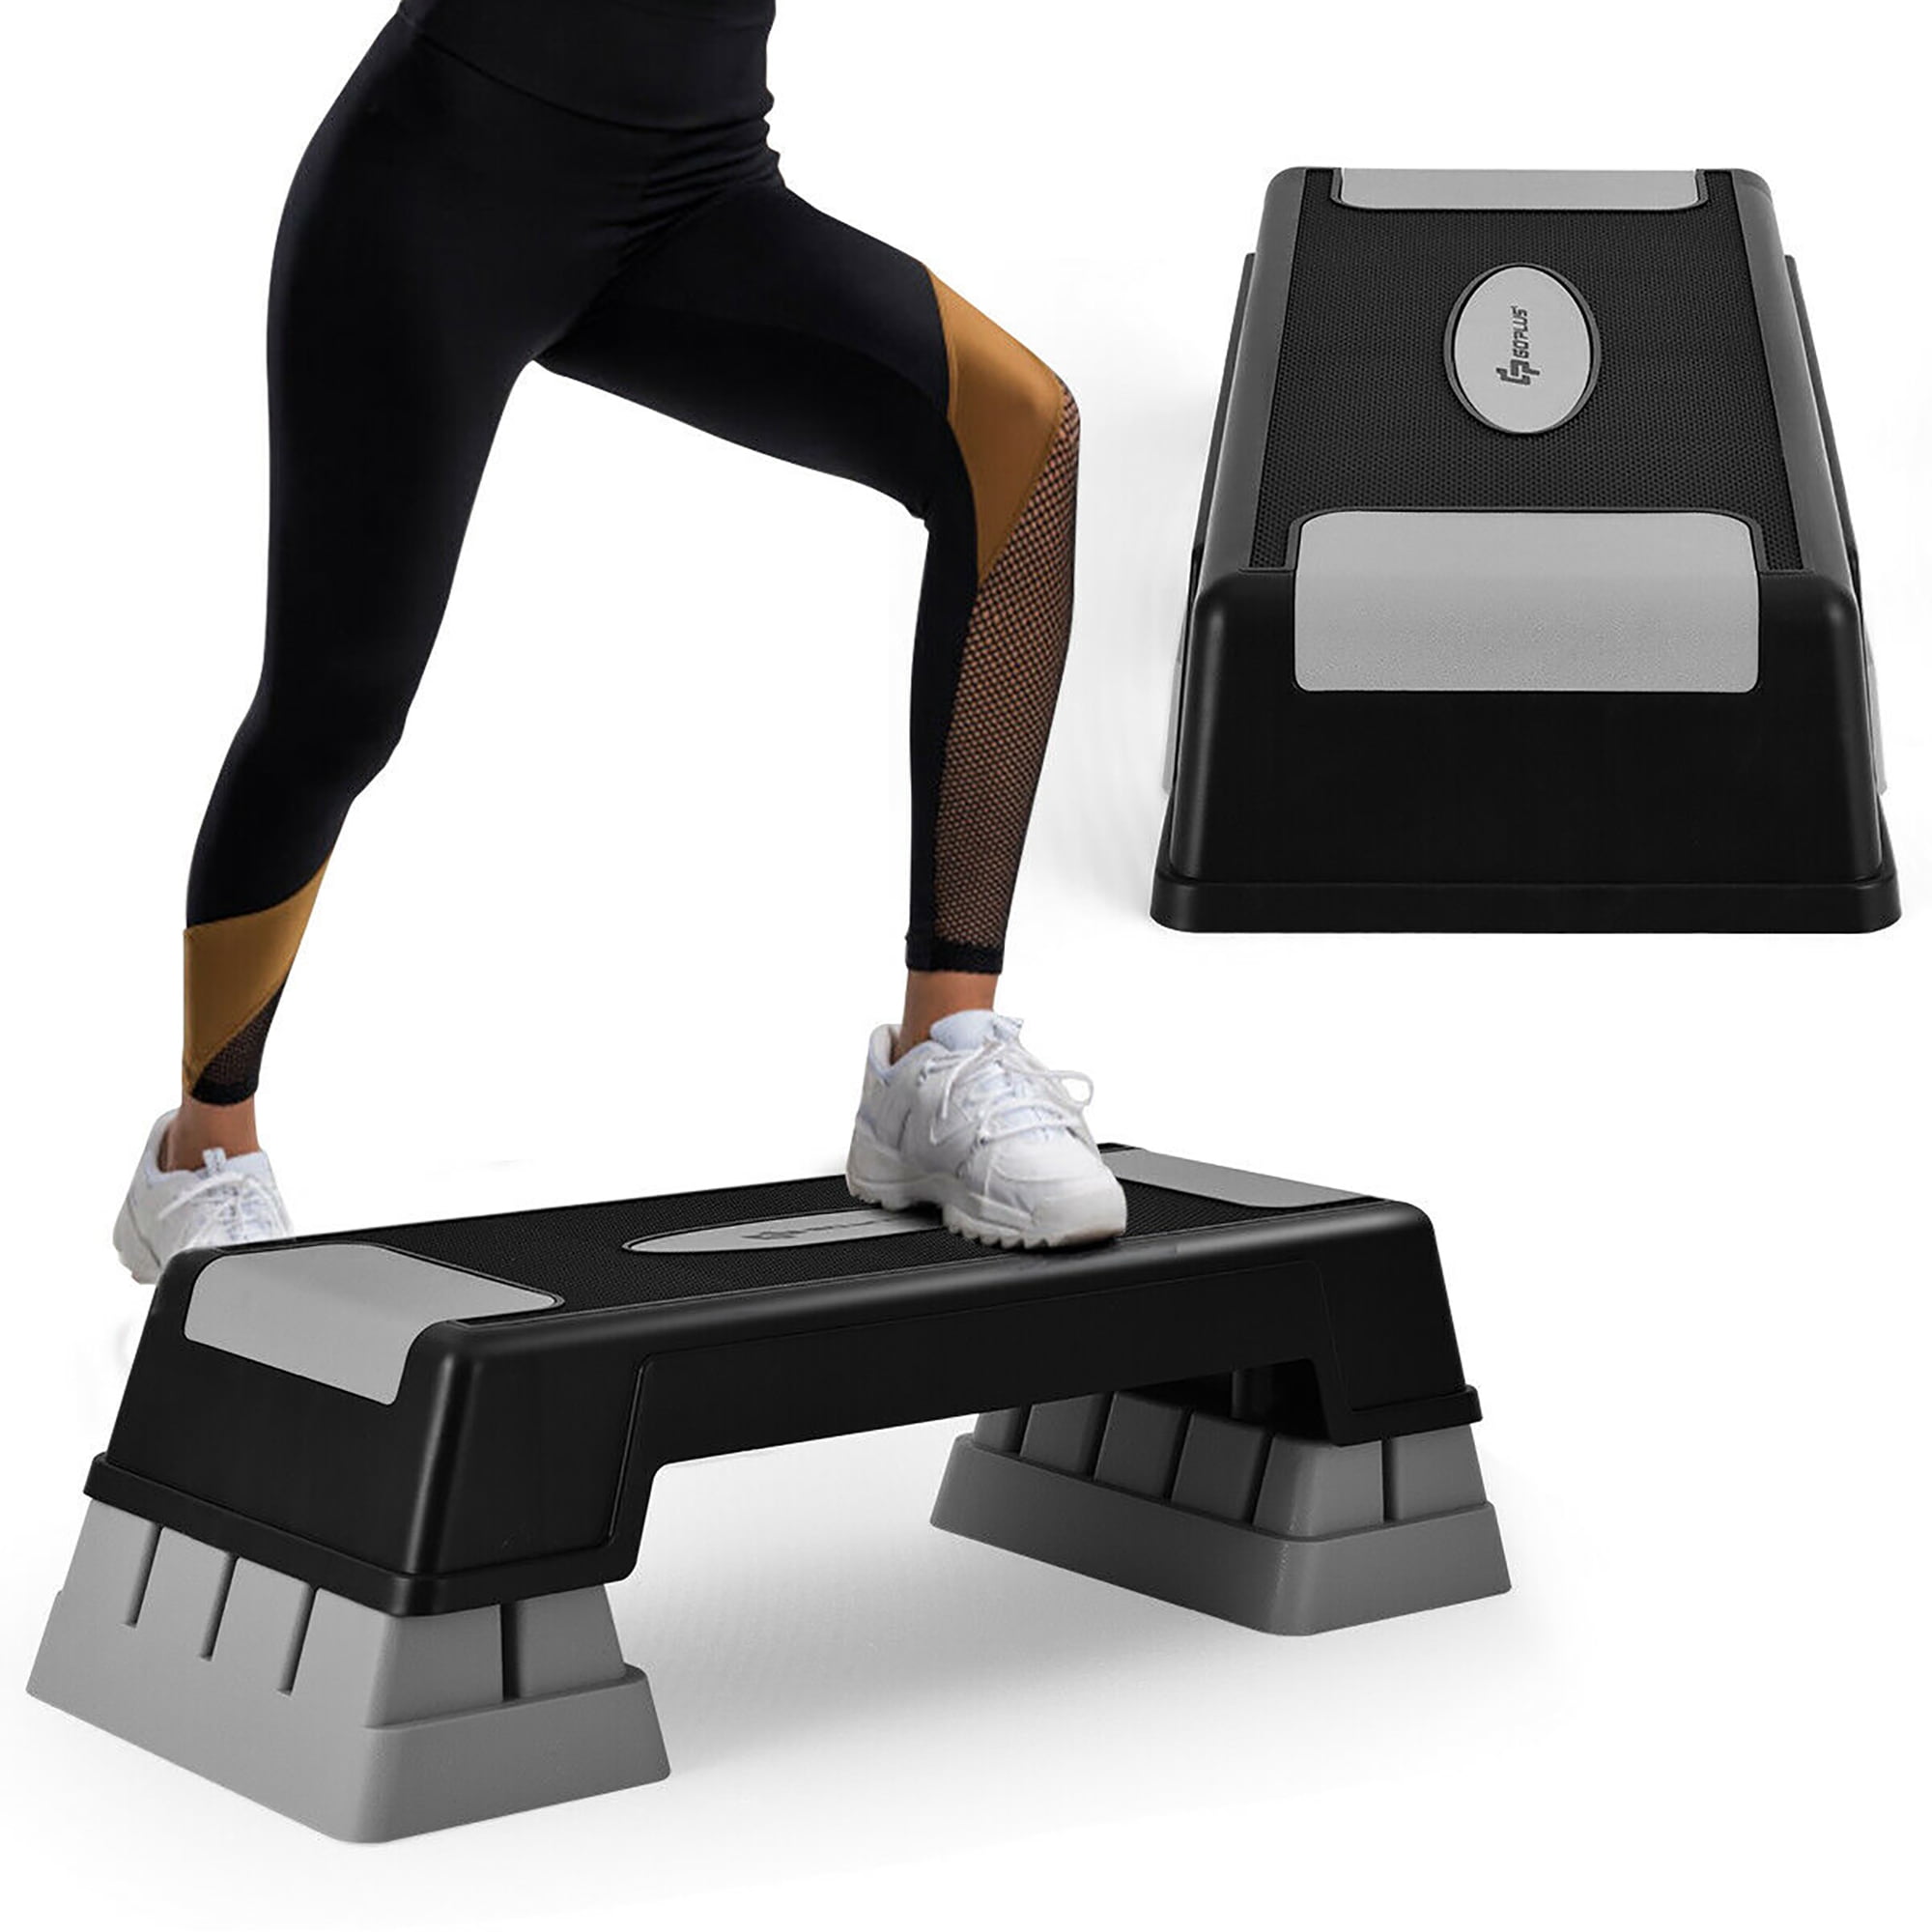 Shock-Absorb & Anti-Slip Surface 31 Exercise Step Platform with Detachable Risers GYMAX Adjustable Aerobic Stepper 3-Level Height Workout Platforms with Non-Slip Pads 